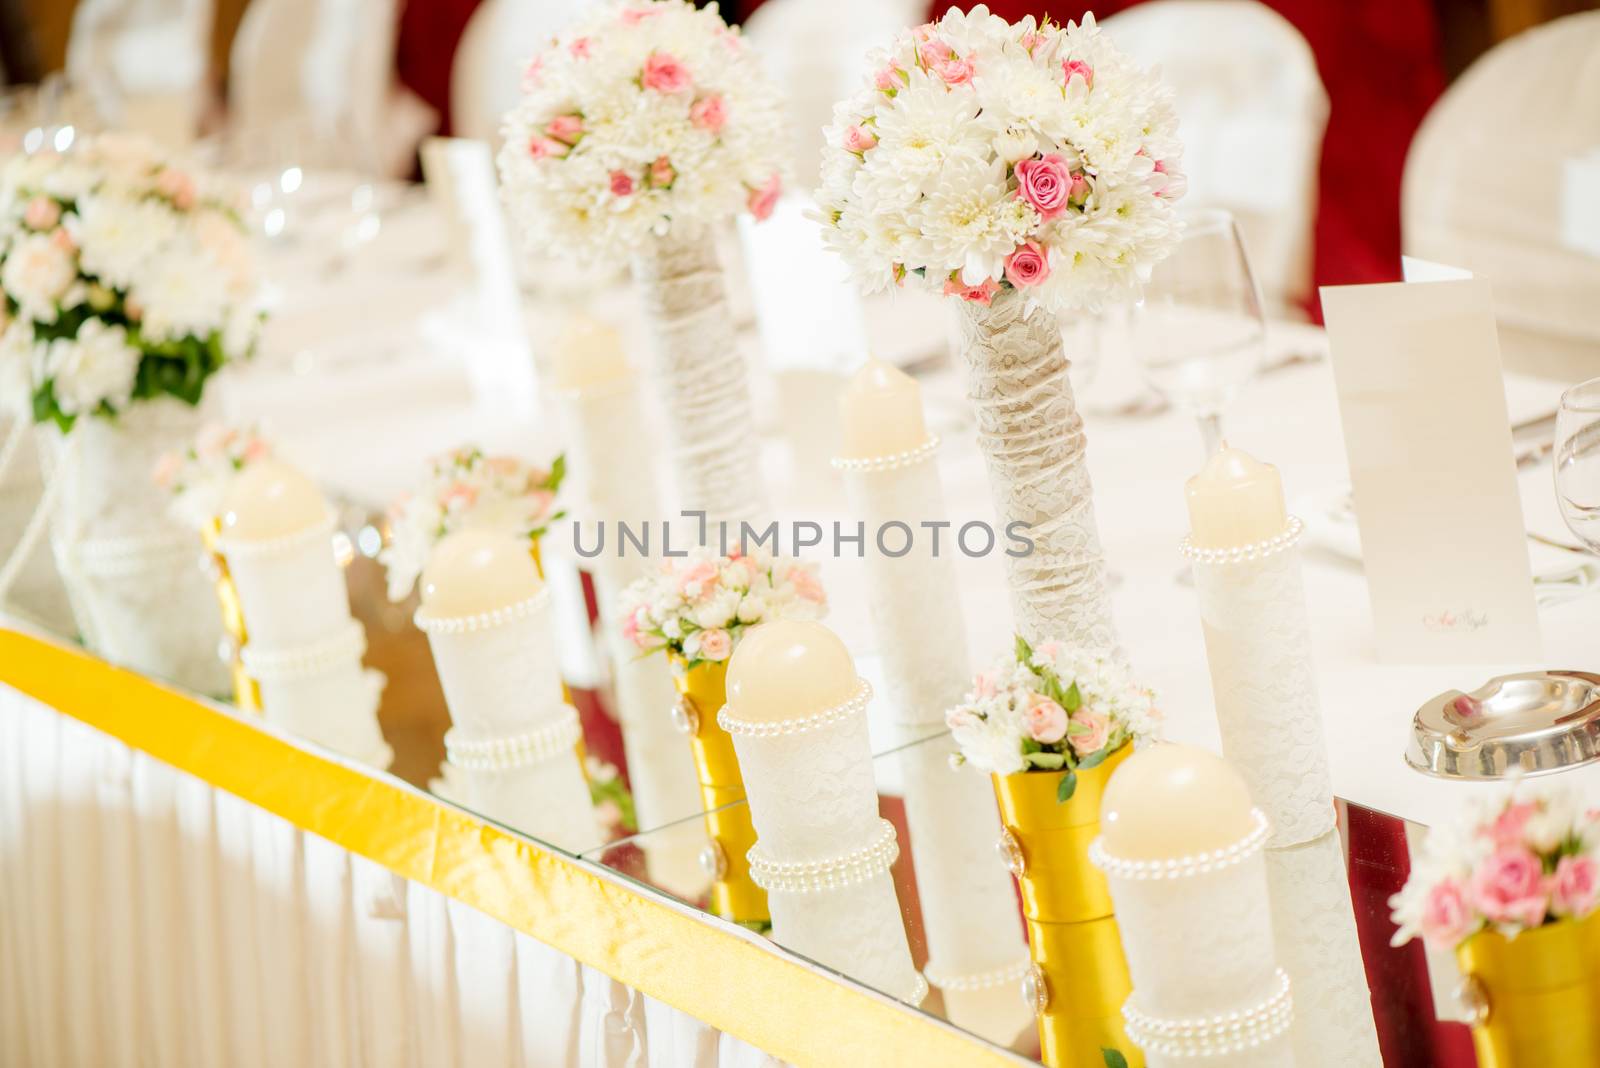 Wedding table decoration with candle, flowers and glassware